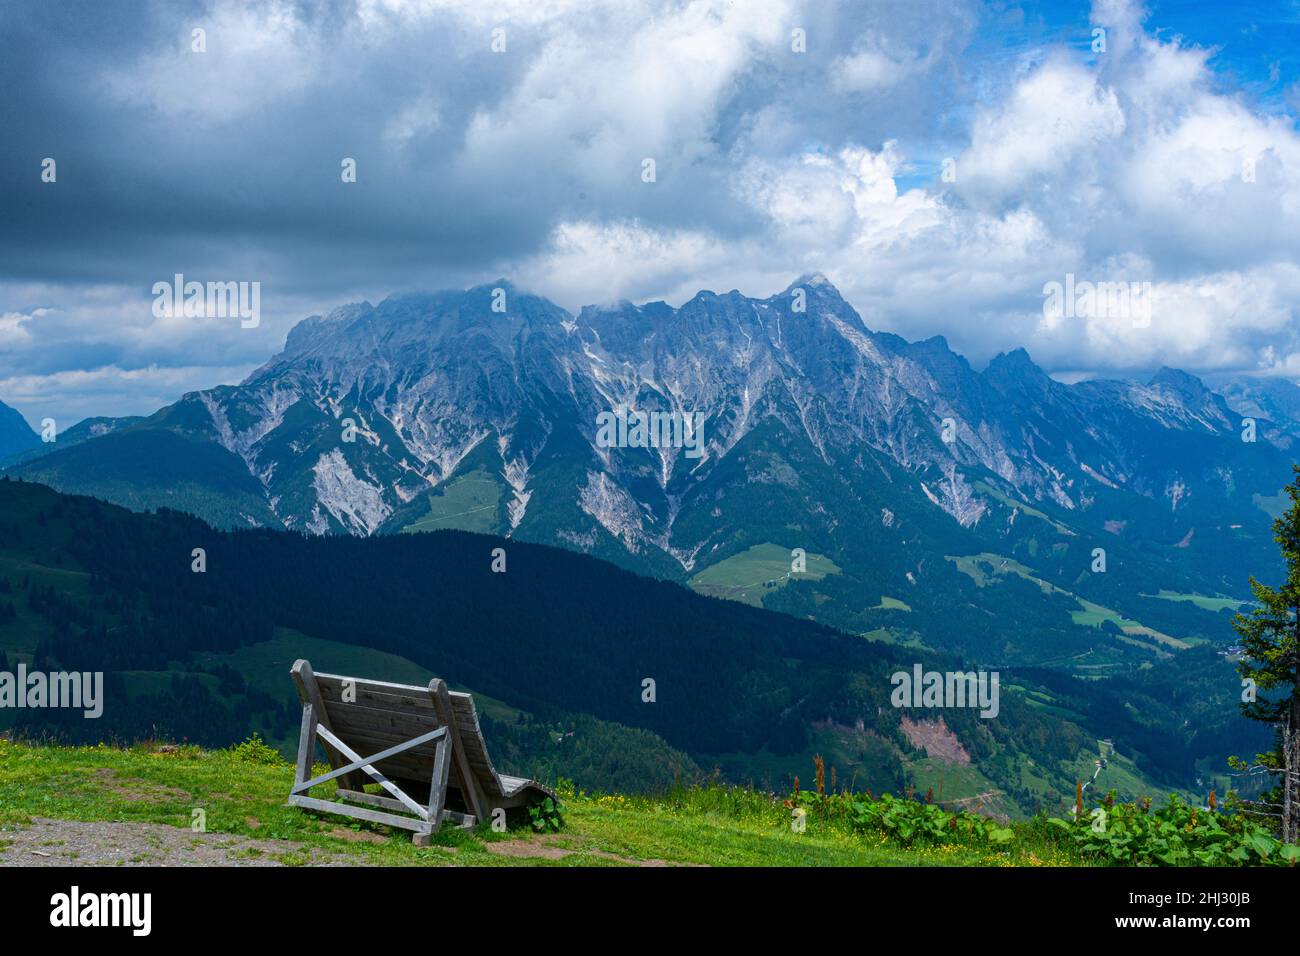 View of the mountains and the X-Press cable car over the bike paths, Saalbach-Hinterglemm, Alps, Austria Stock Photo